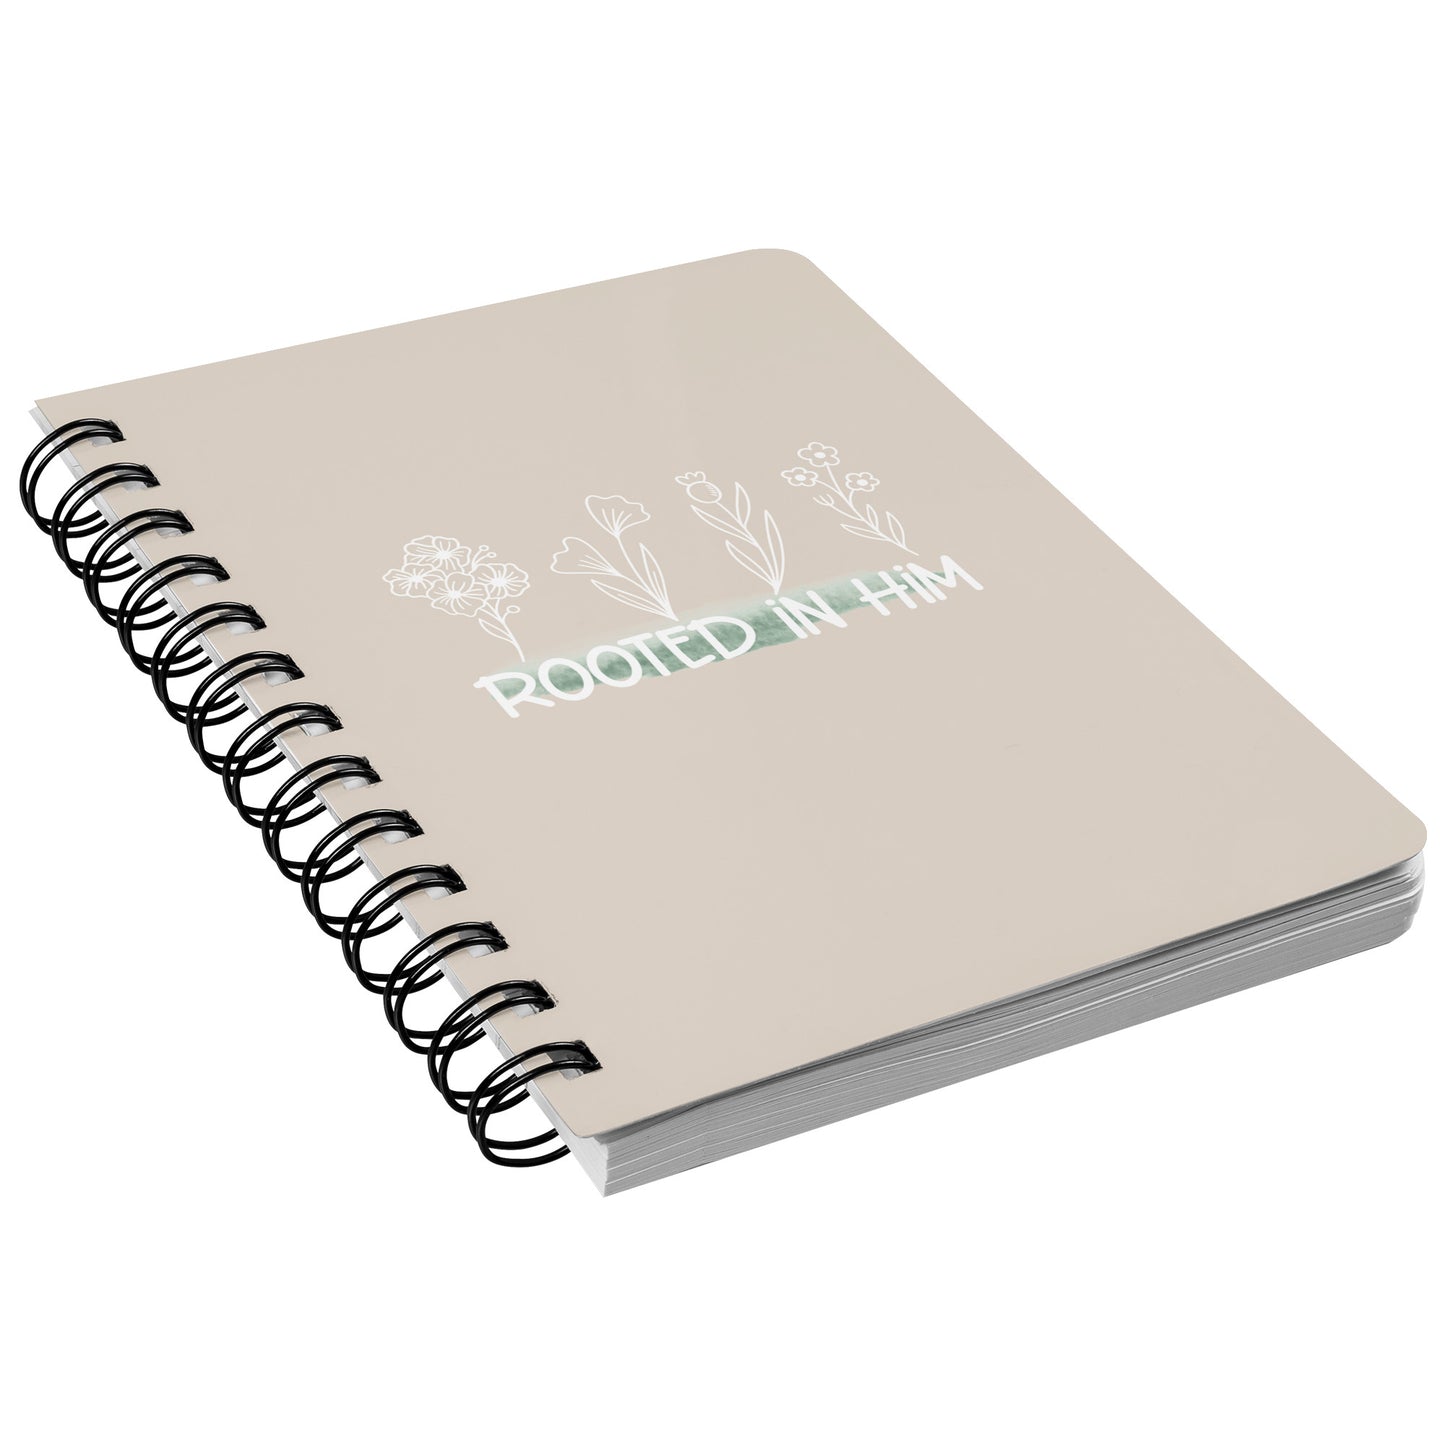 Rooted in Him Spiral Journal Notebook